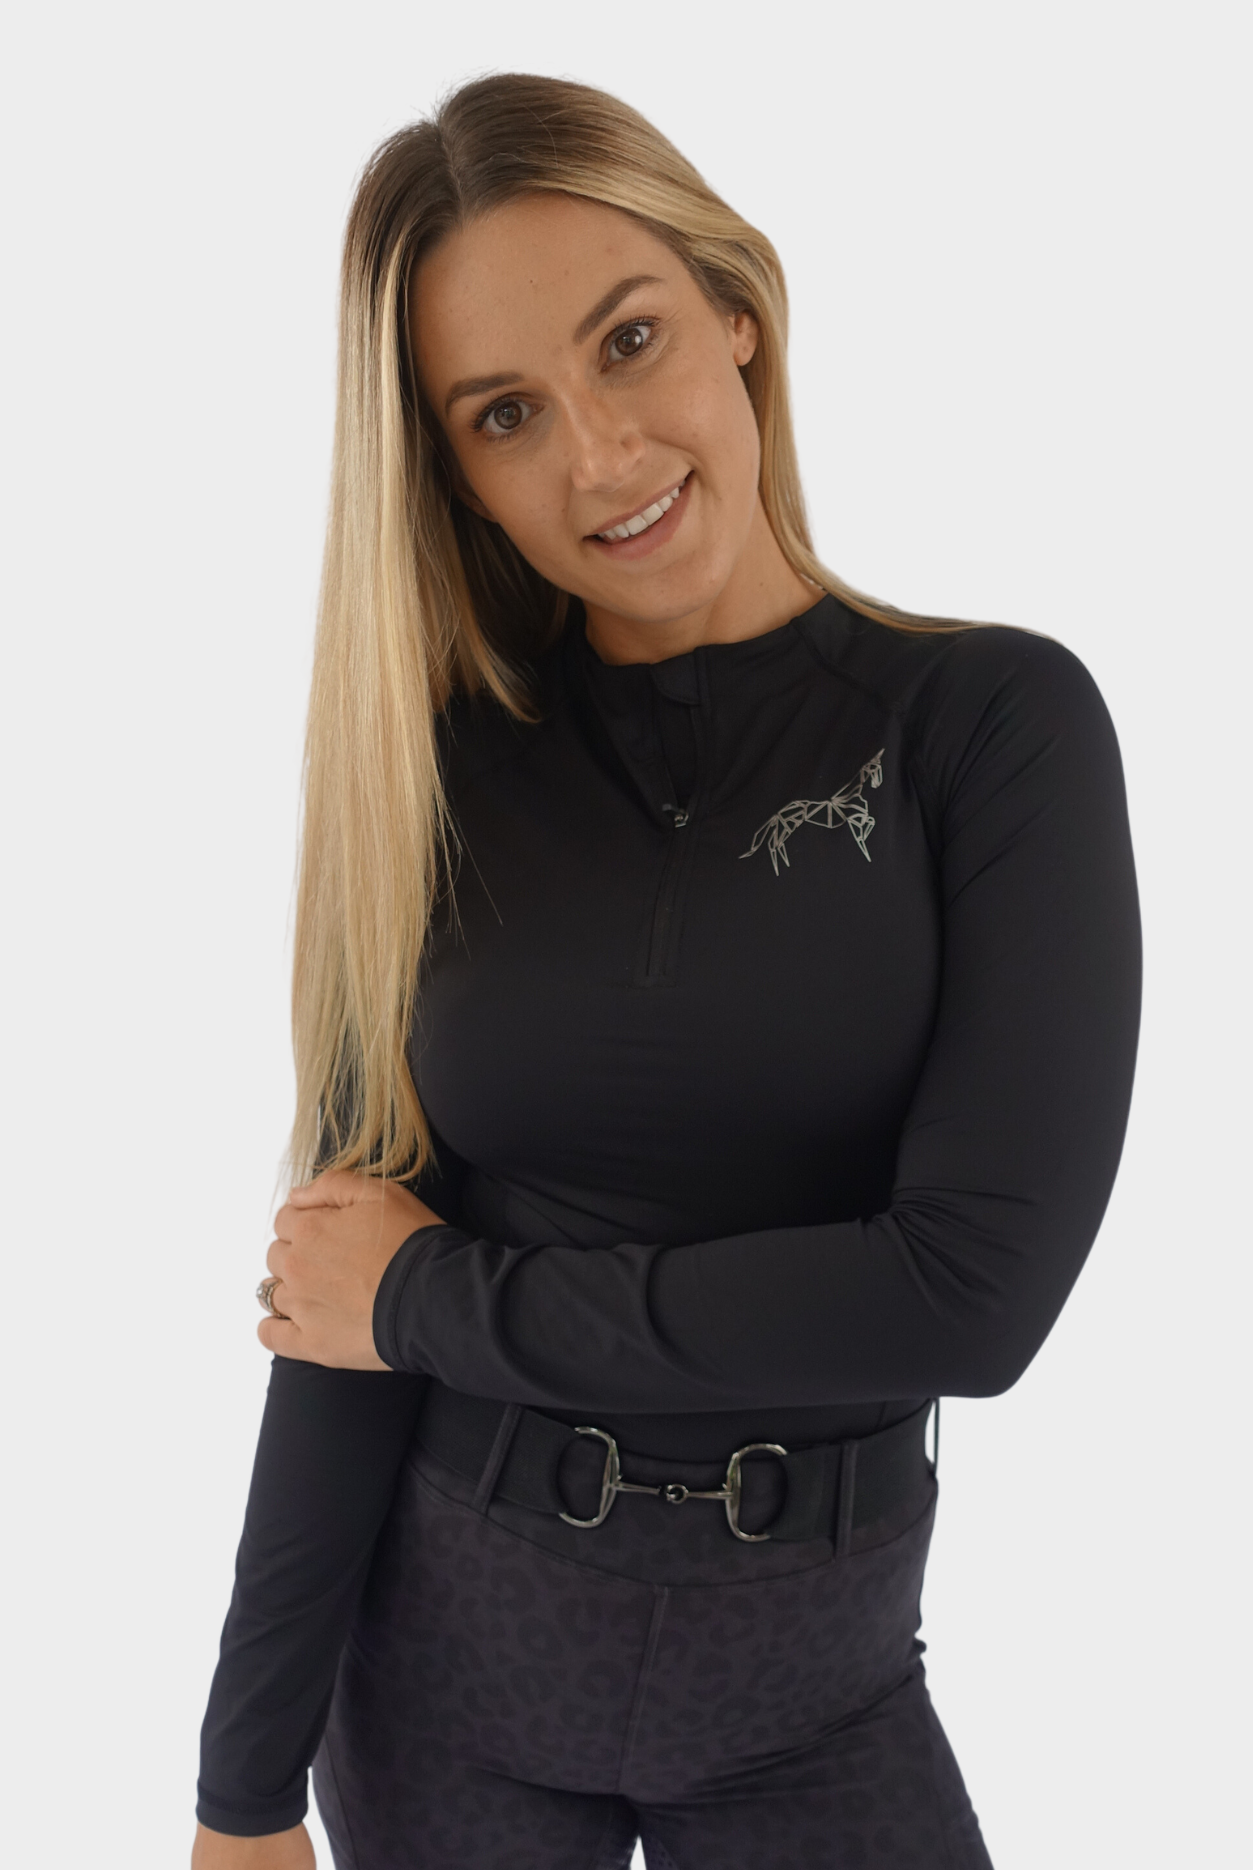 Long sleeve base layer in black for ultimate comfort while riding